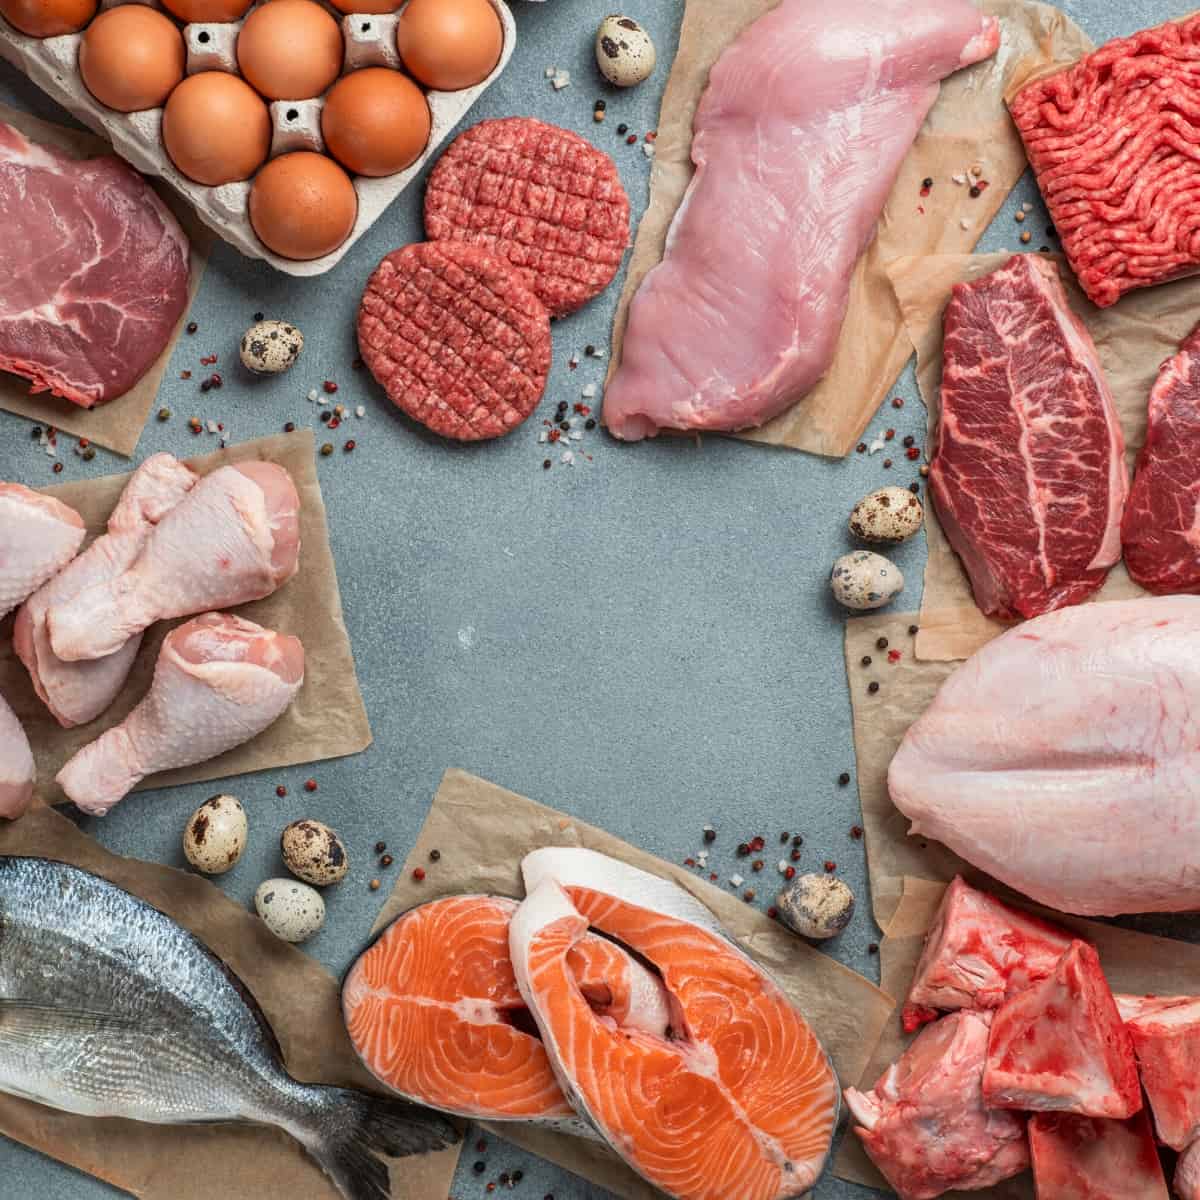 A variety of foods consumed on the carnivore diet.